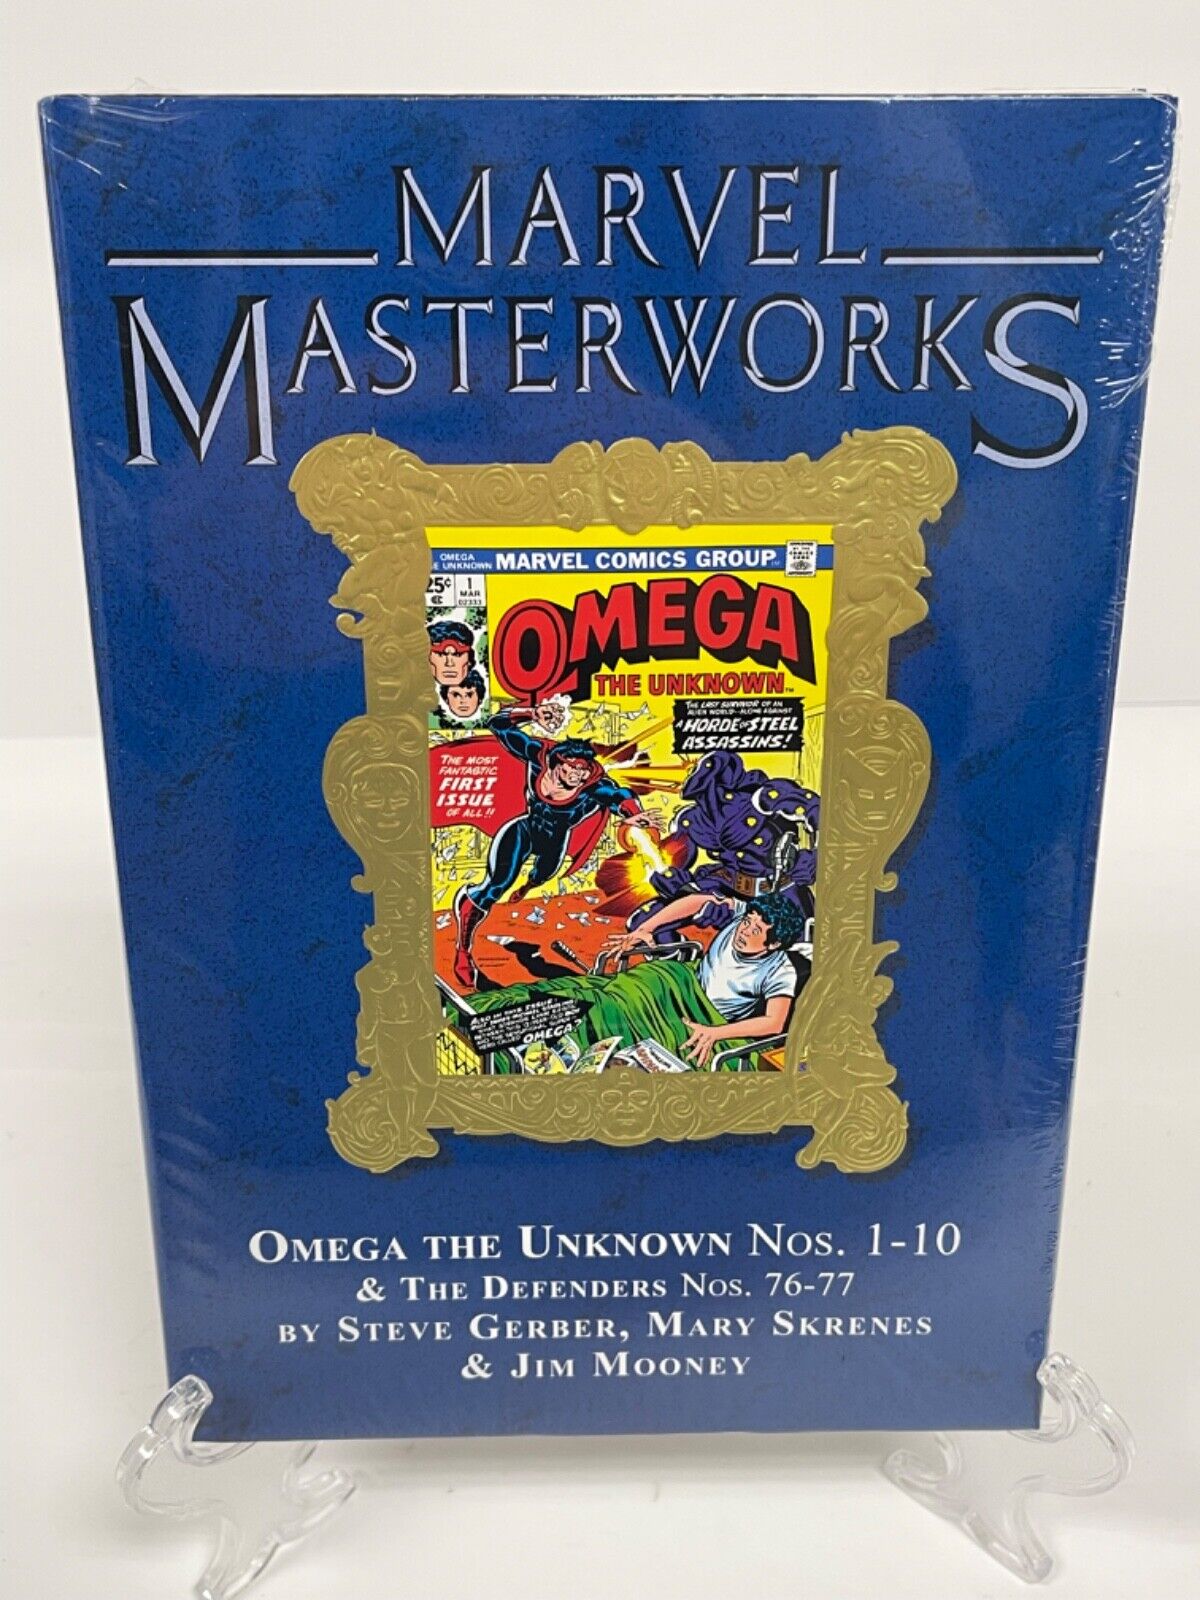 Omega The Unknown Vol 1 Marvel Masterworks DIRECT MARKET COVER New HC Hardcover